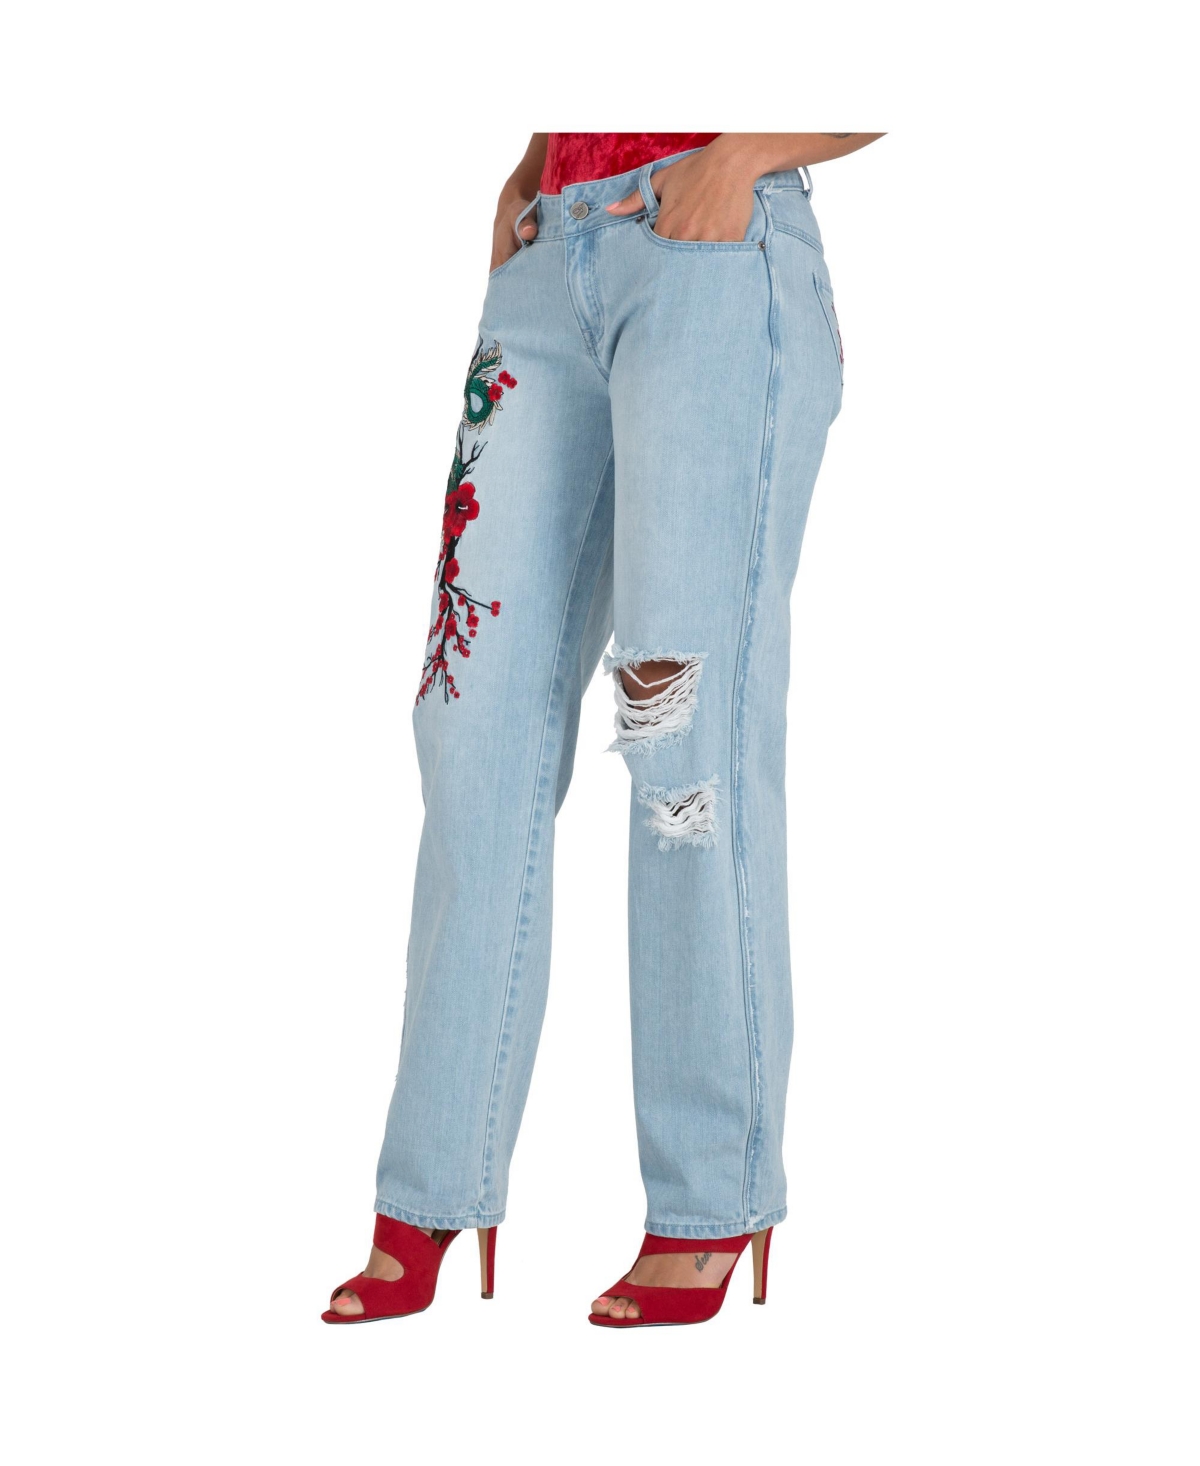 Women's Curvy Fit Light Wash Dragon Embroidered Mom Jeans - Blue dragon